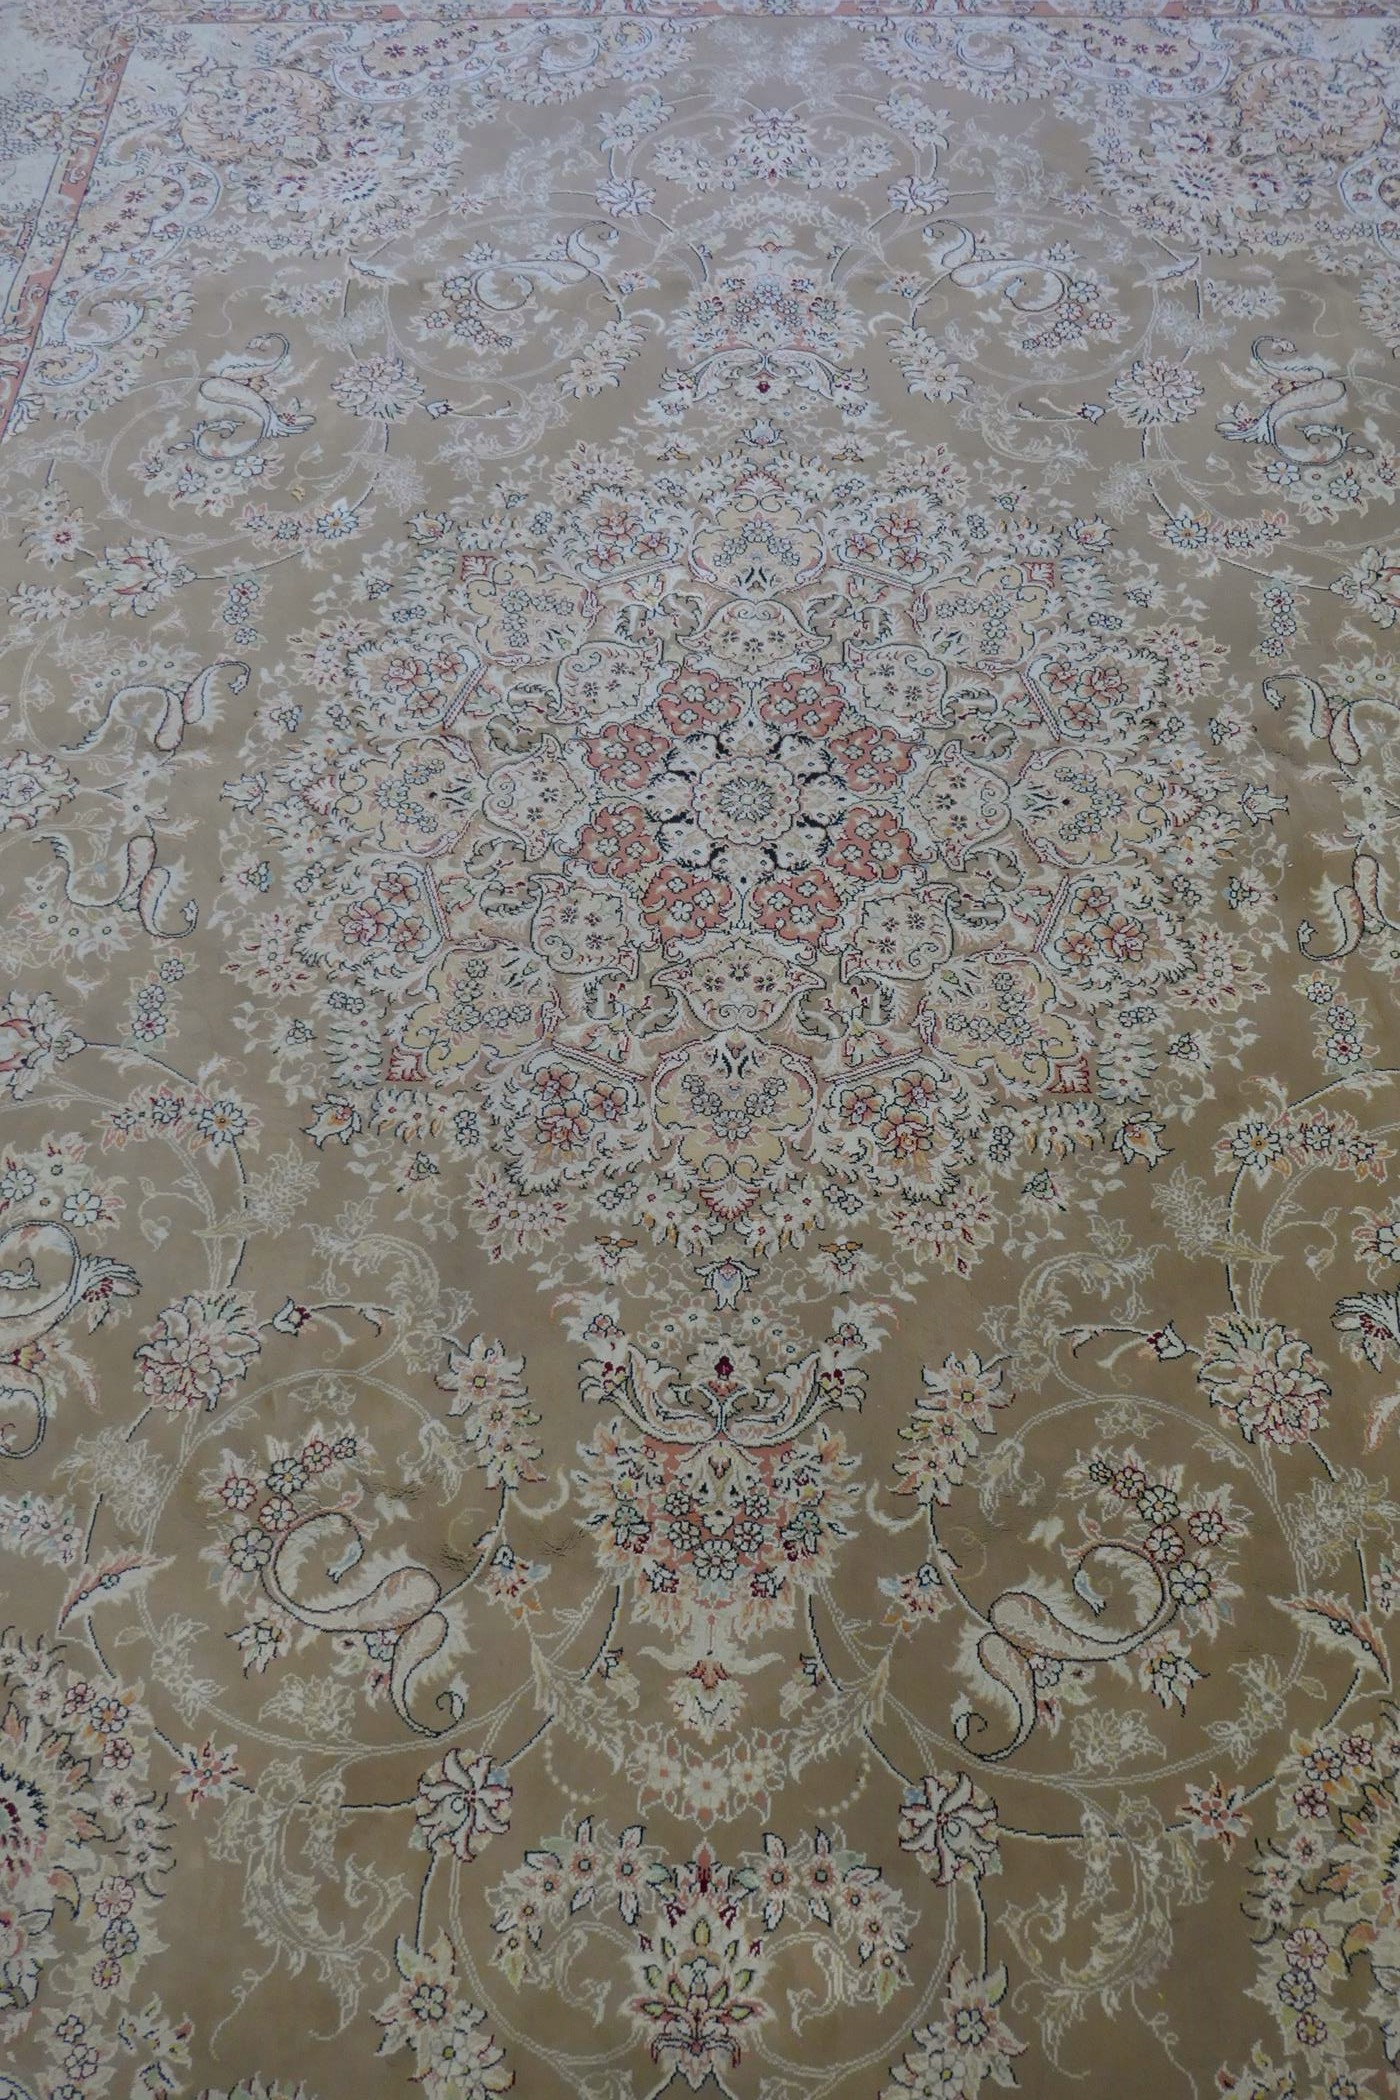 A large fine woven Iranian carpet with bespoke floral design on a buff coloured ground, 300 x 390cm - Image 4 of 6